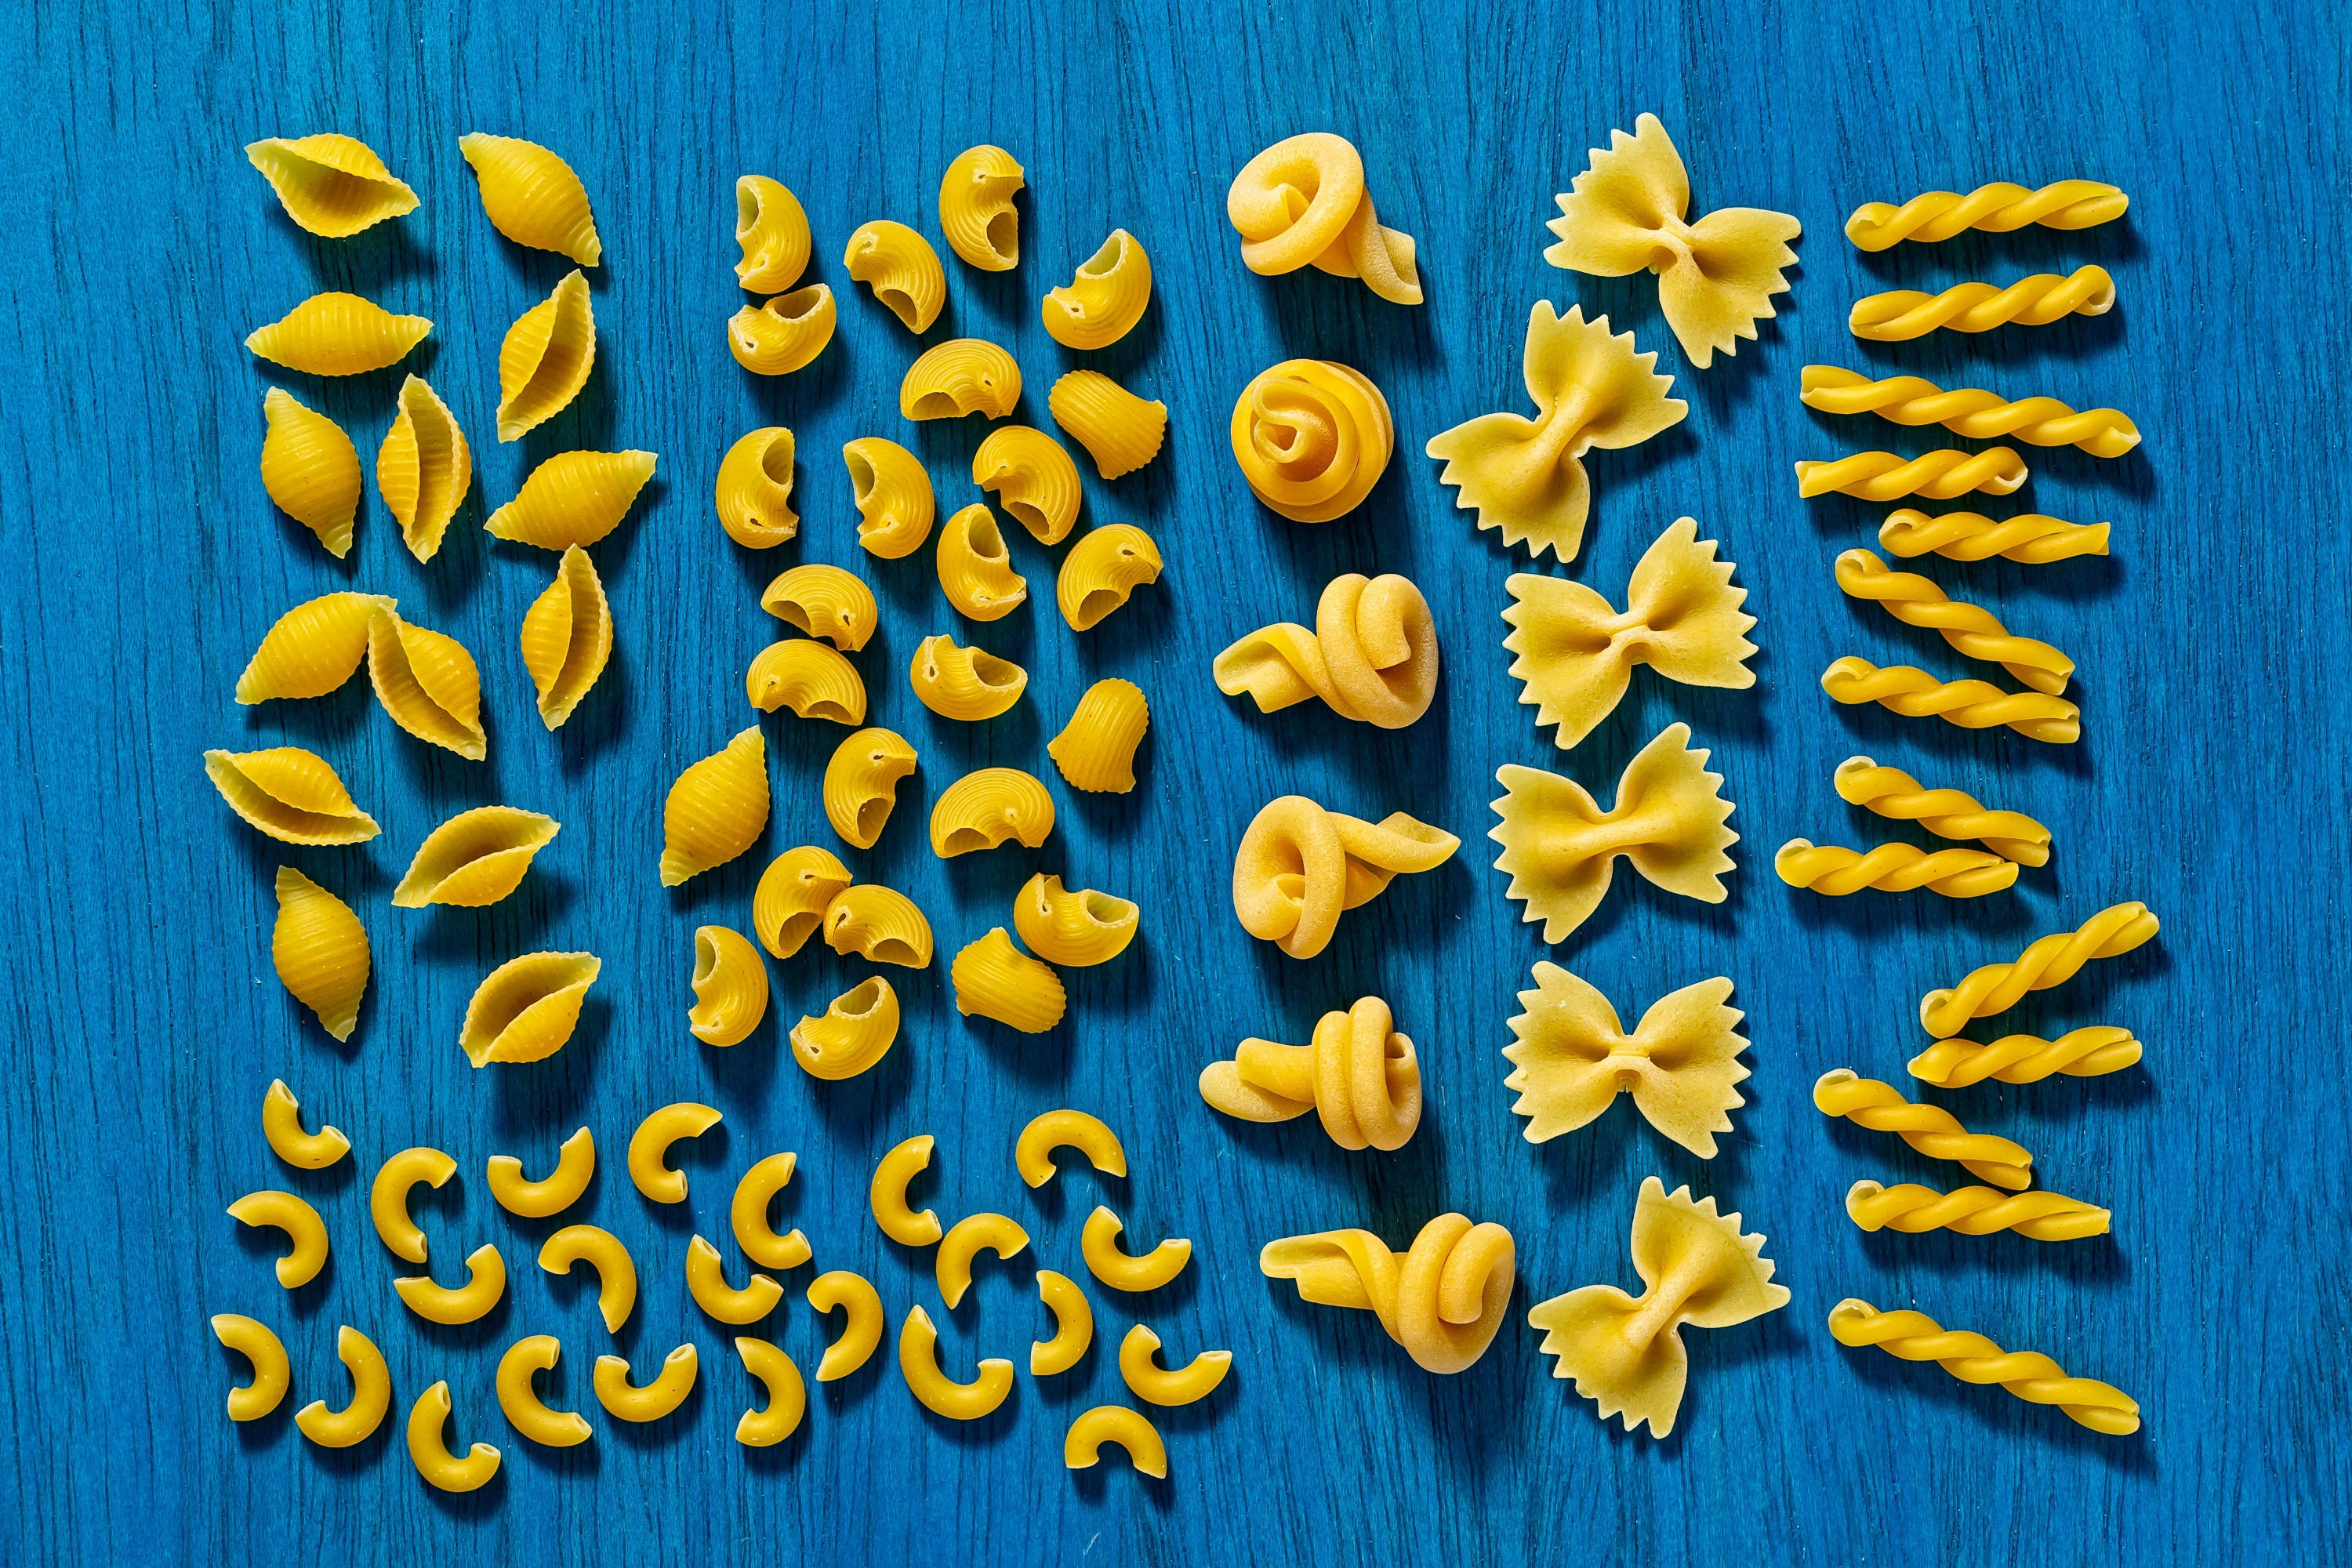 Top, from left, conchiglie, pipette, trottole, farfalle, gemelli. Bottom left, elbow macaroni